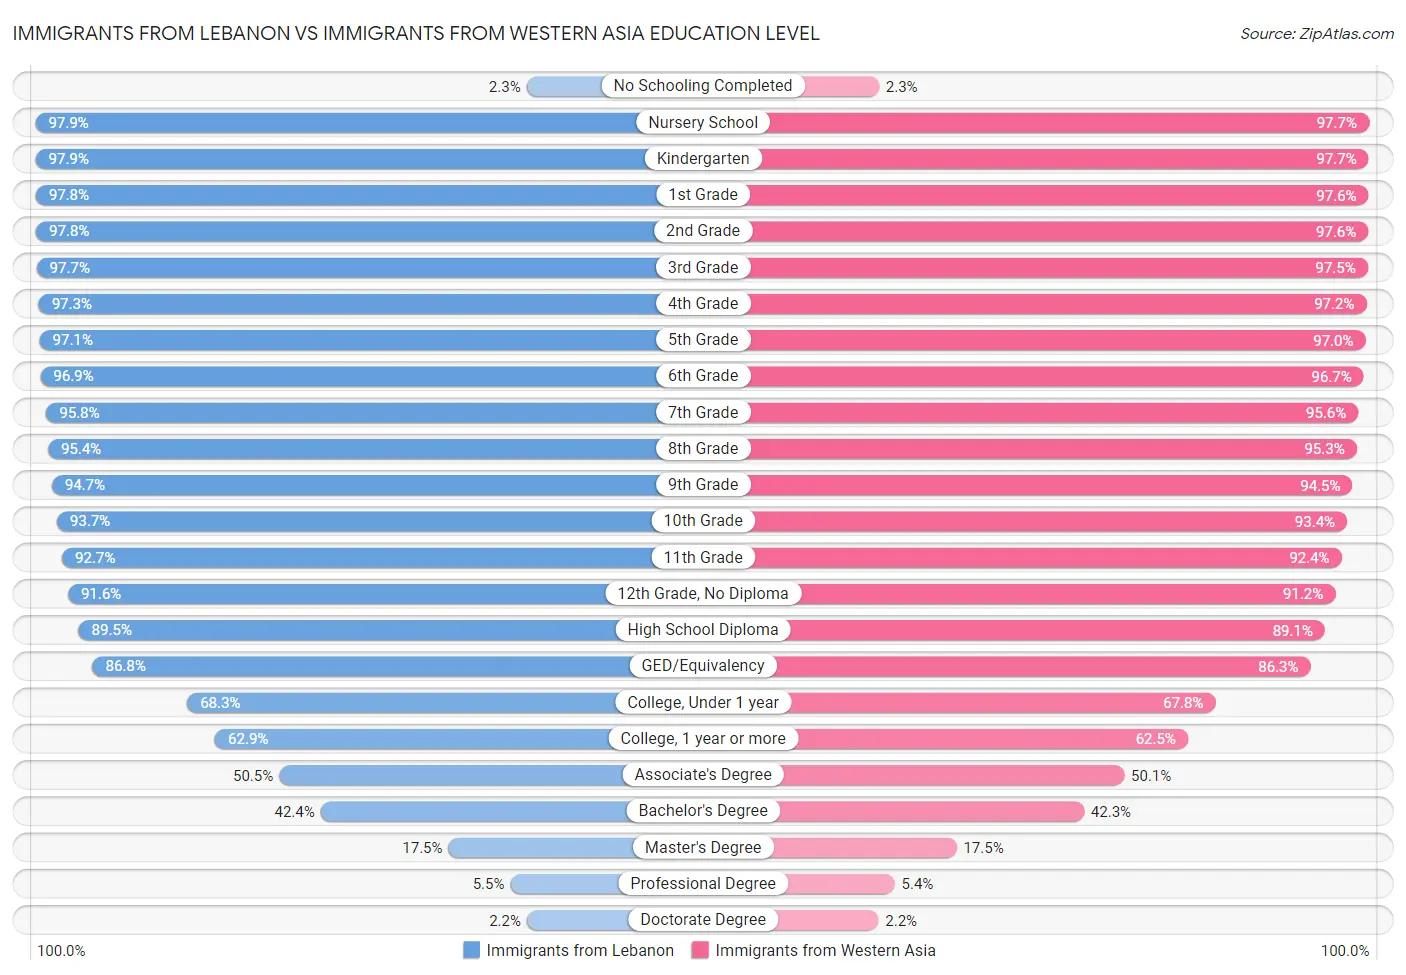 Immigrants from Lebanon vs Immigrants from Western Asia Education Level